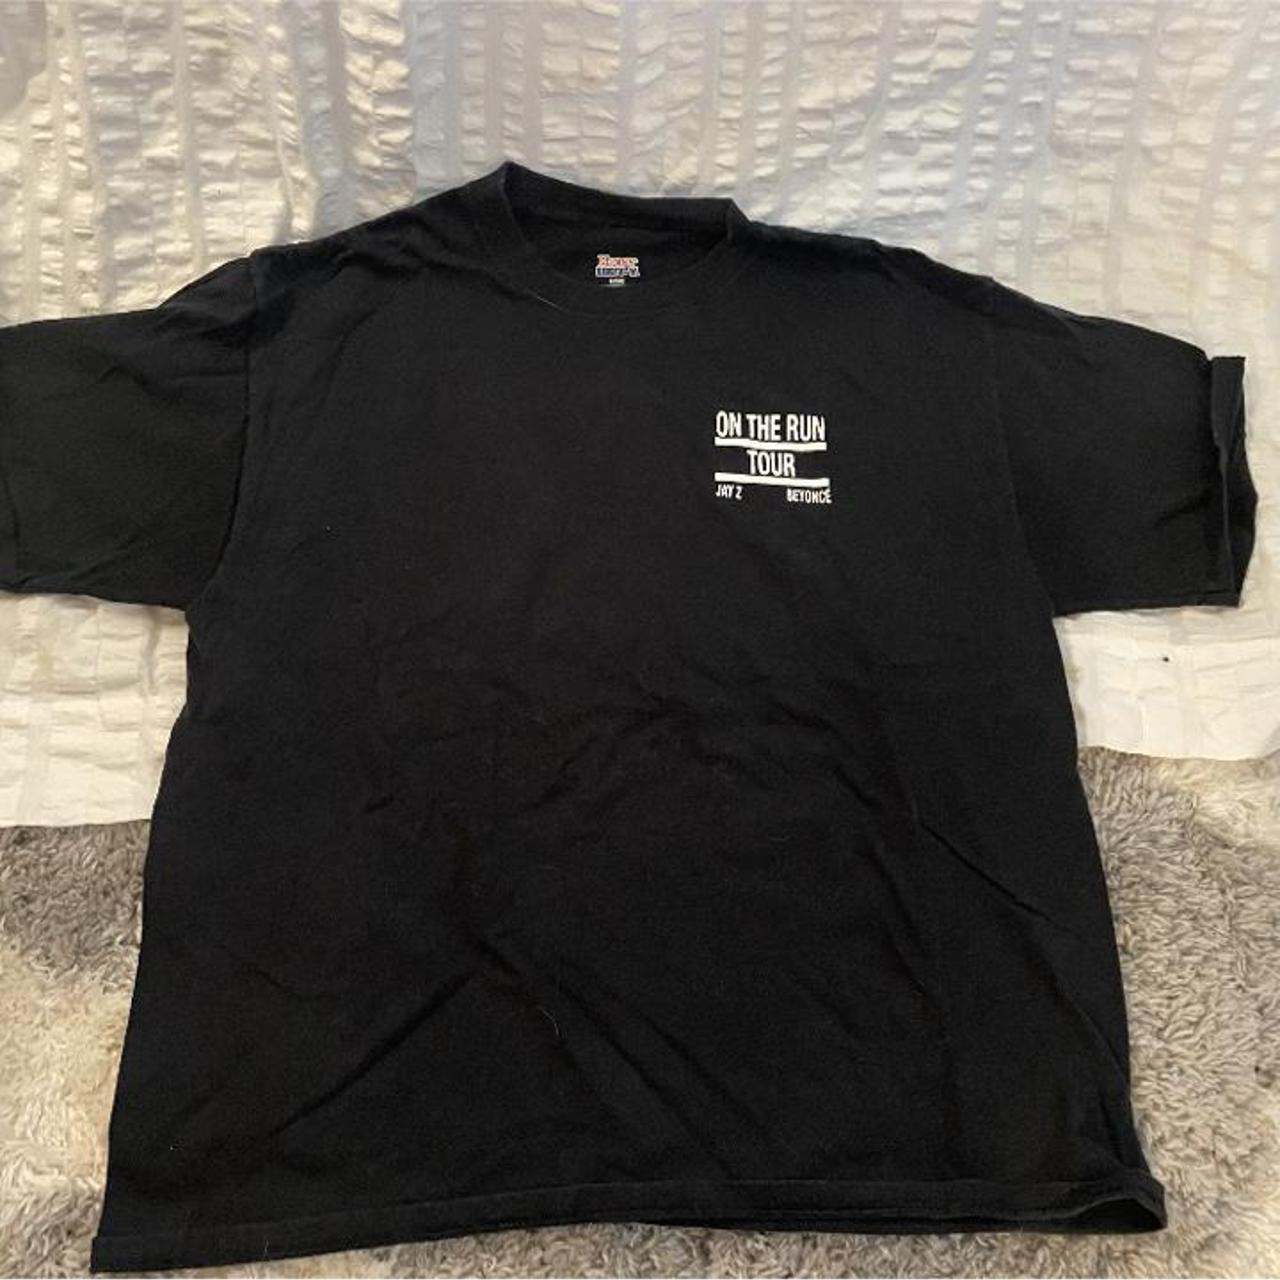 On The Run Tour I Merch T-Shirt Bought this during... - Depop